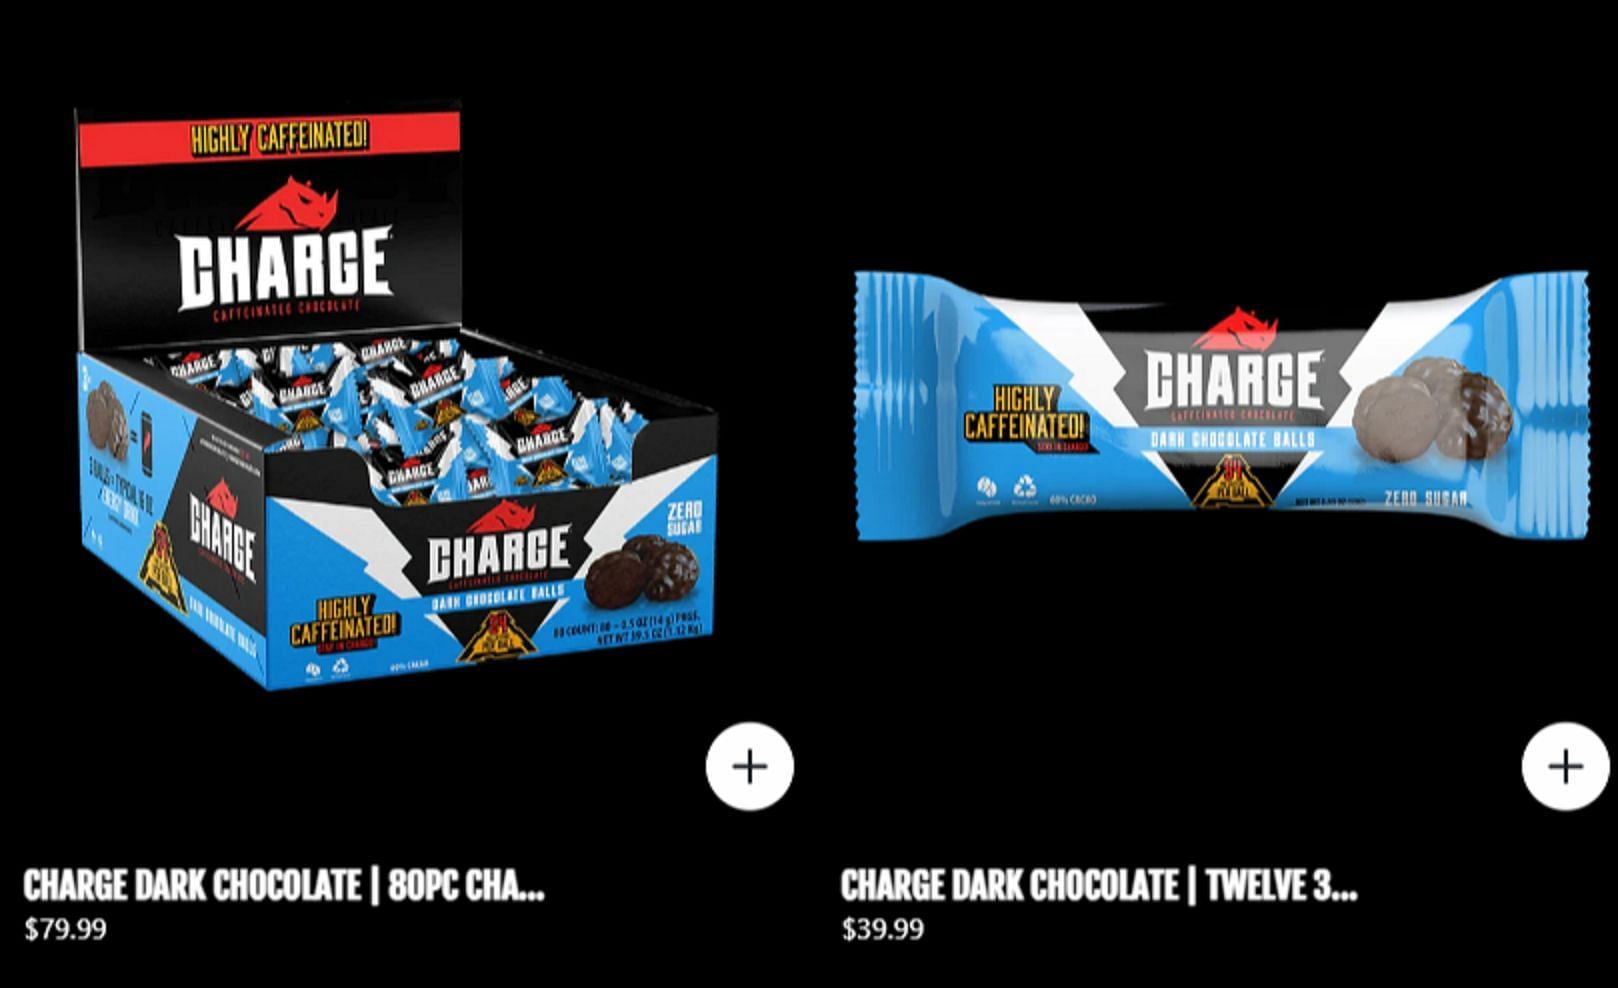 Charge Dark Chocolates priced at $79.99 and $39.99. (Image via chargechocolate.com)